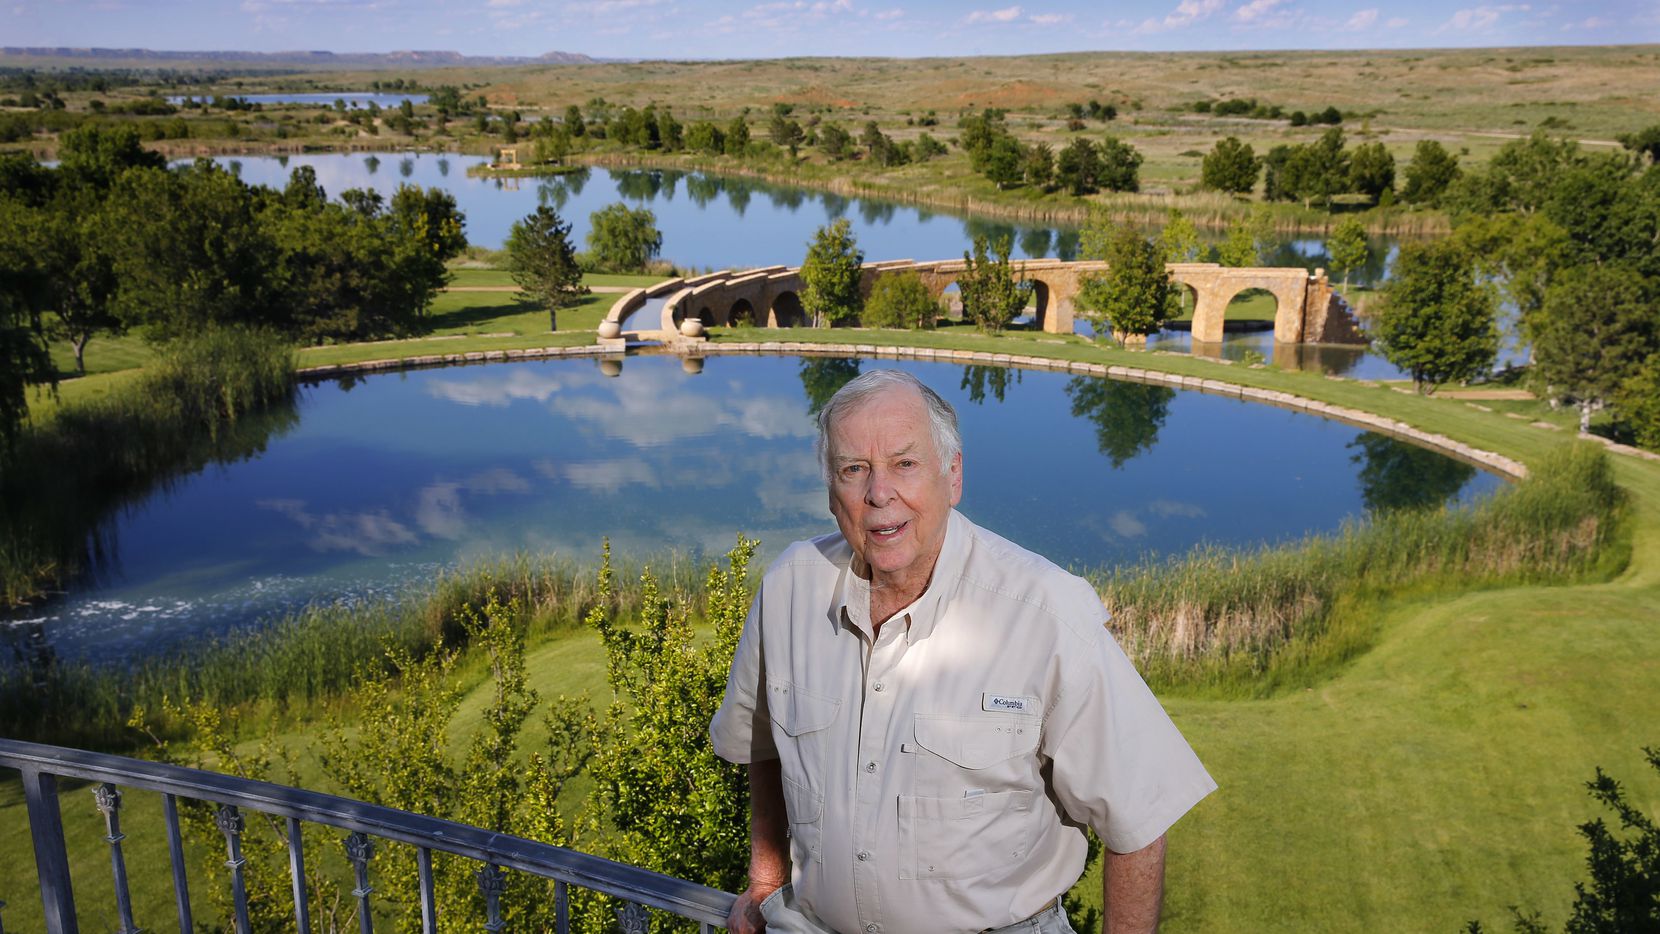 Oil tycoon T. Boone Pickens, as photographed in 2017 at his Mesa Vista Ranch in the...